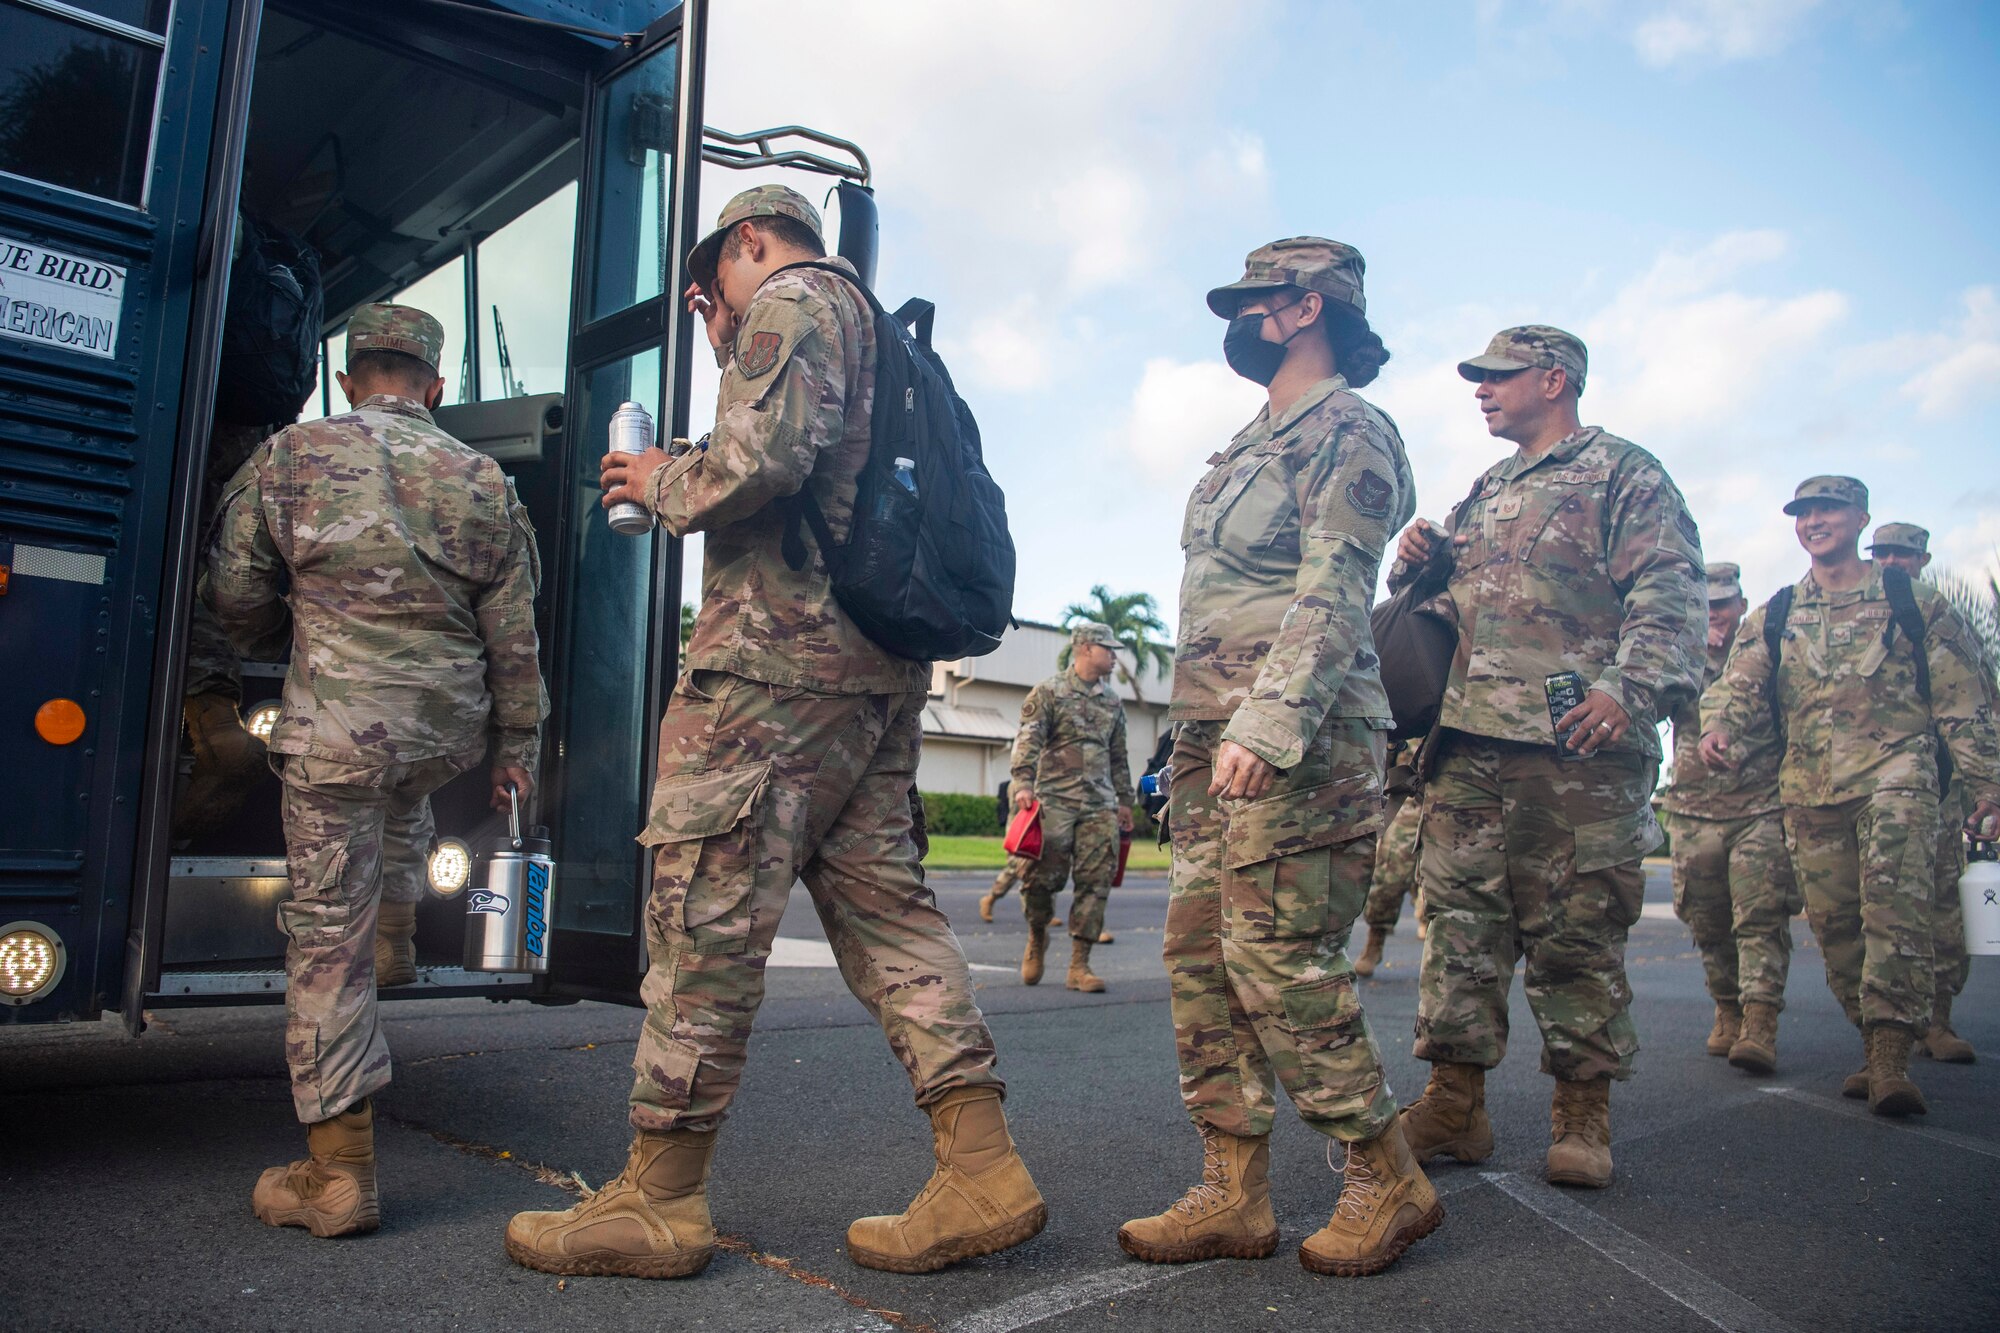 624th Civil Engineer Squadron (CES) Reserve Citizen Airmen aboard a bus while at Joint Base Pearl Harbor-Hickam, Hawaii, June 10, 2021. CES personnel will be part of a training Total Force Integration (TFI) event at Schofield Barracks, Hawaii. TFI is a blend of active, Guard, and Reserve personnel working together to accomplish the mission.